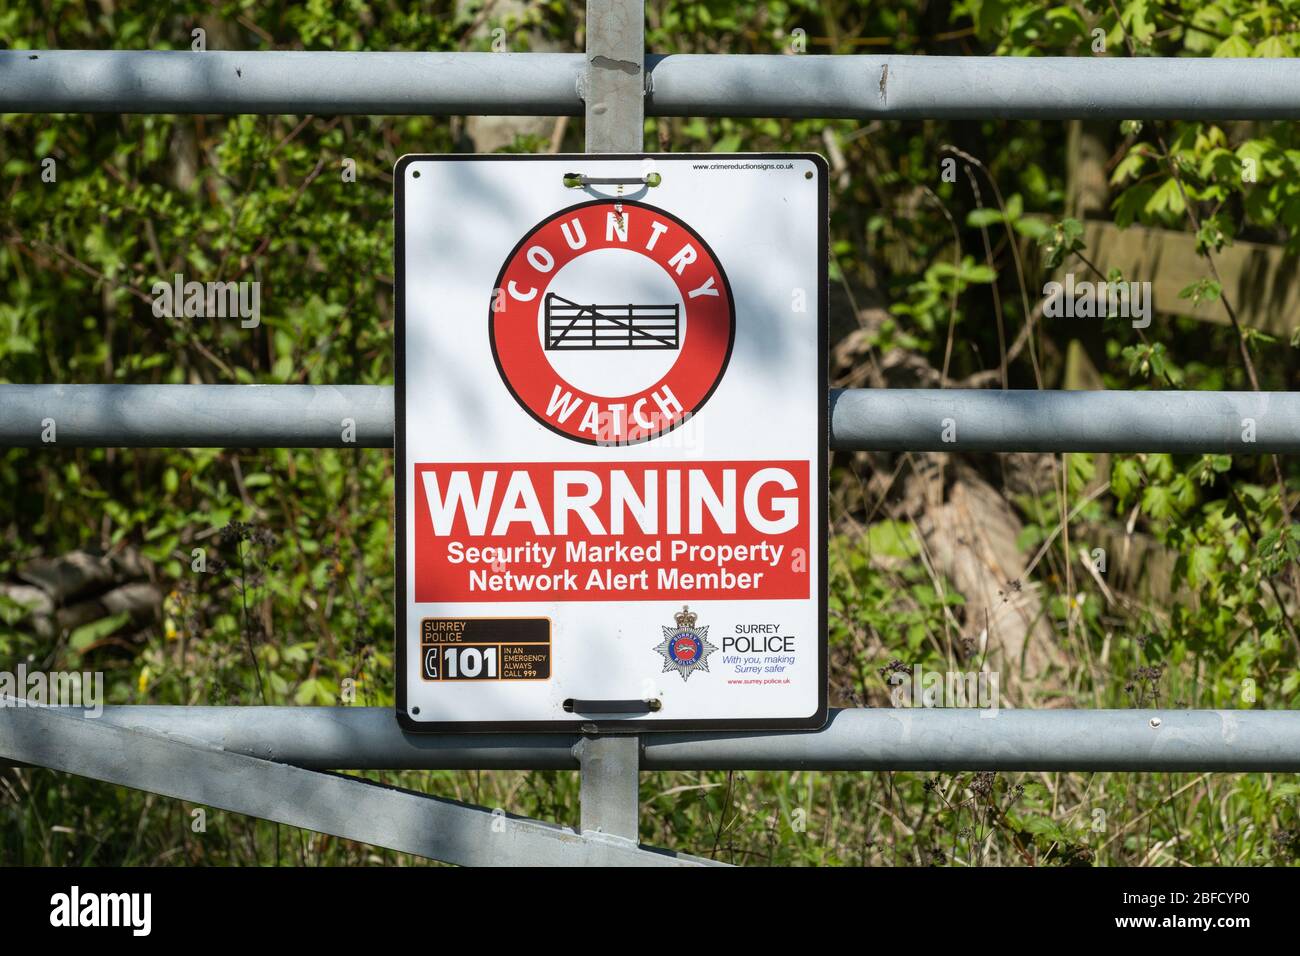 Country Watch notice, warning security marked property, on a gate in the countryside, UK Stock Photo